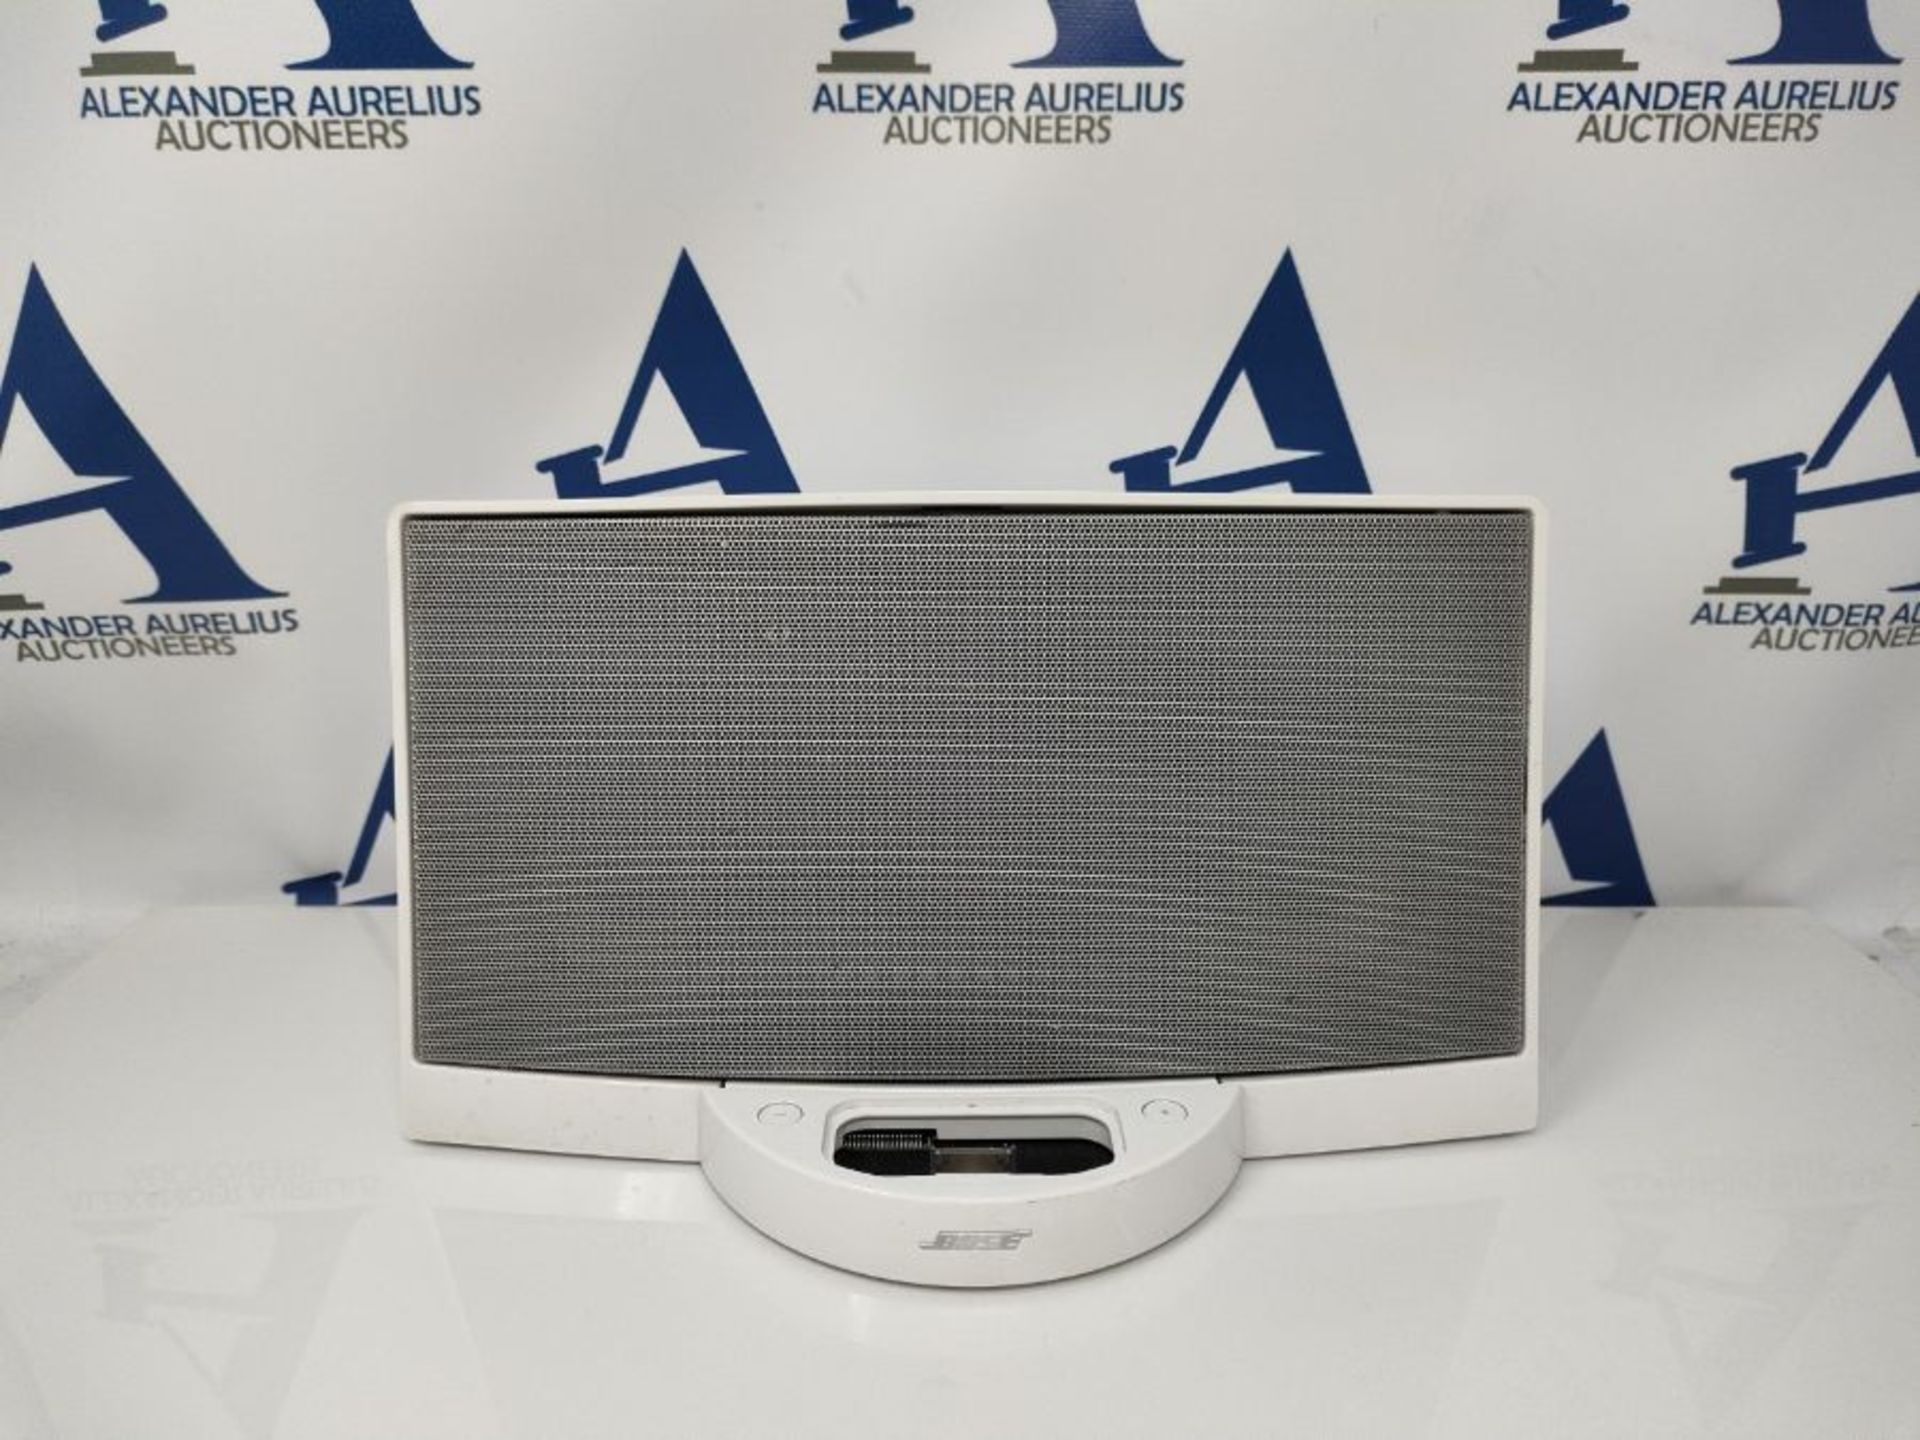 RRP £85.00 Bose SoundDock Digital Music System - Portable speakers with digital player dock for i - Image 4 of 4